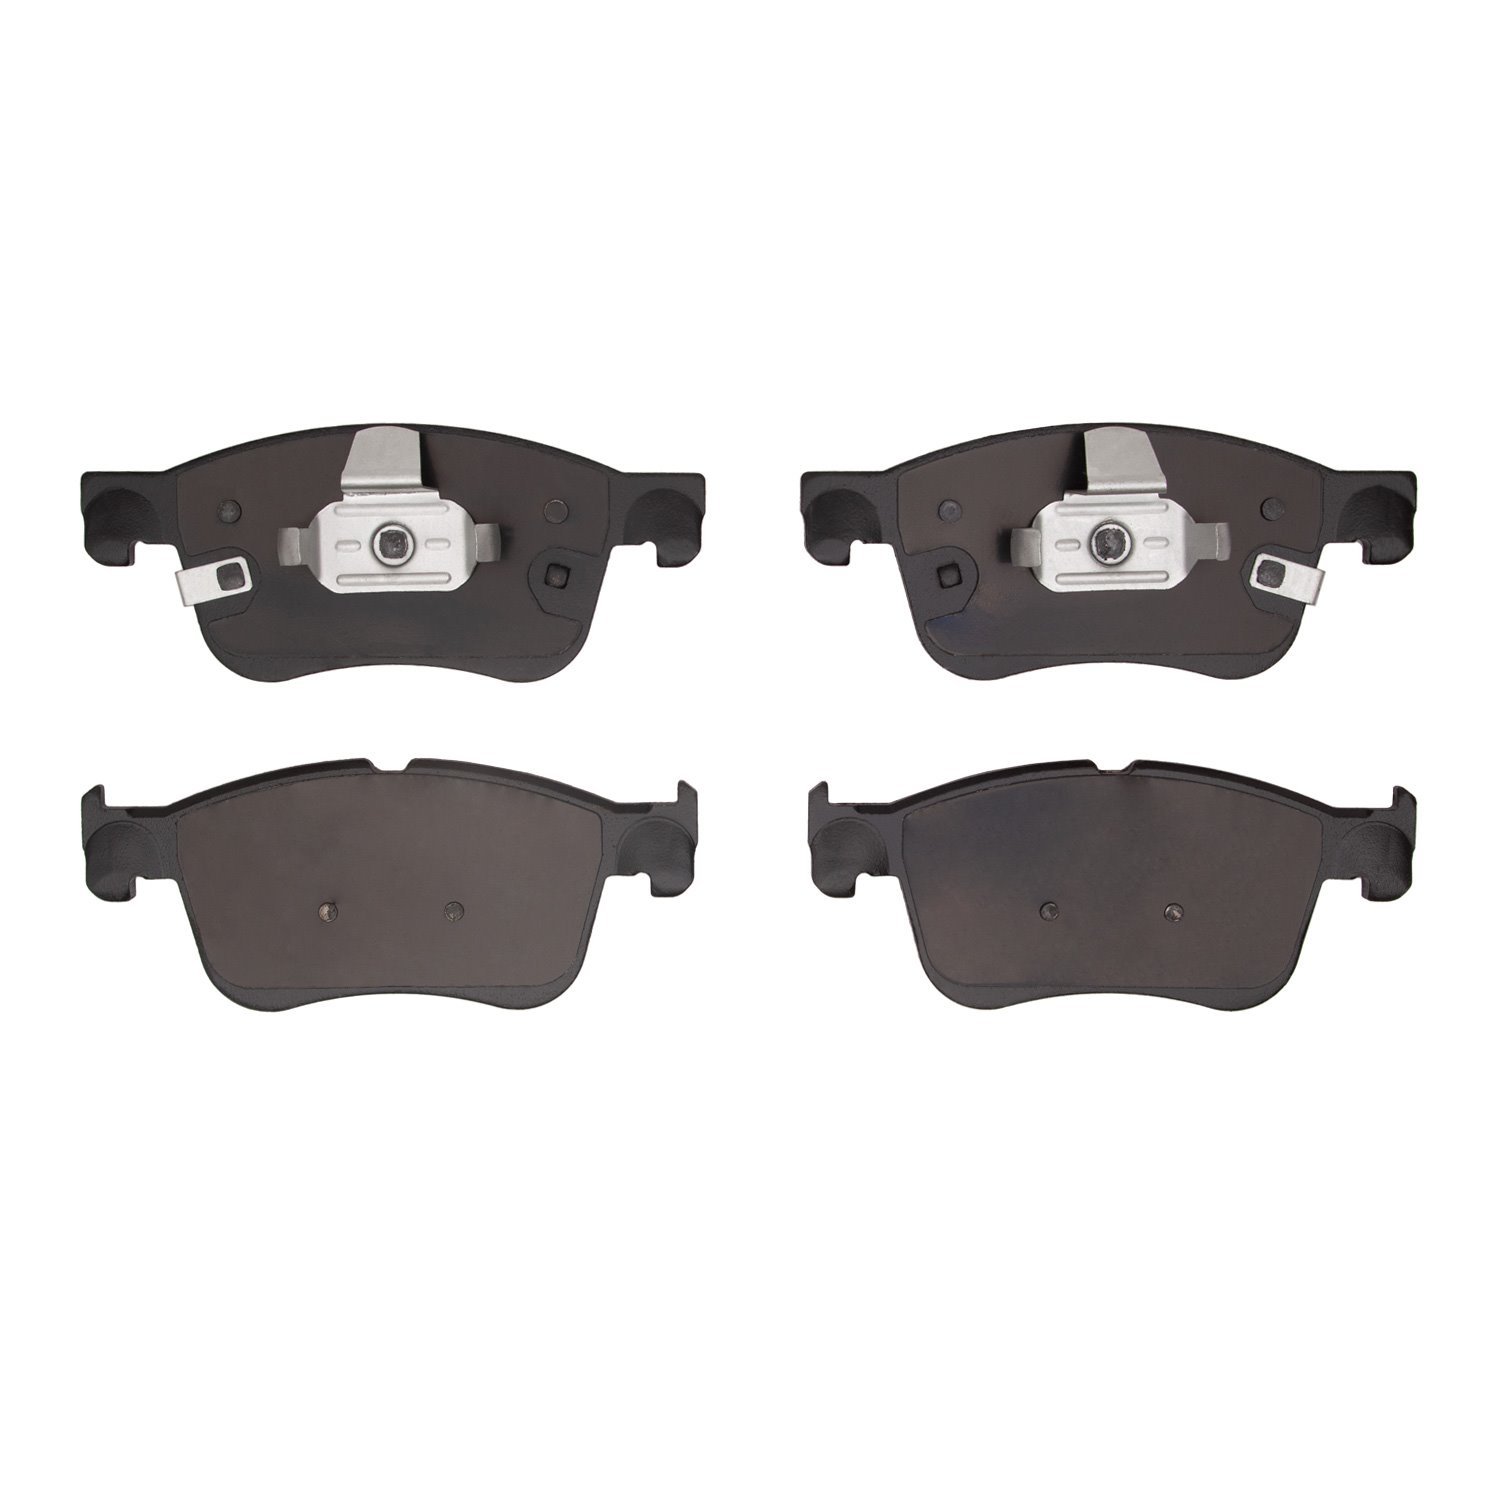 1551-2300-00 5000 Advanced Ceramic Brake Pads, Fits Select Ford/Lincoln/Mercury/Mazda, Position: Front